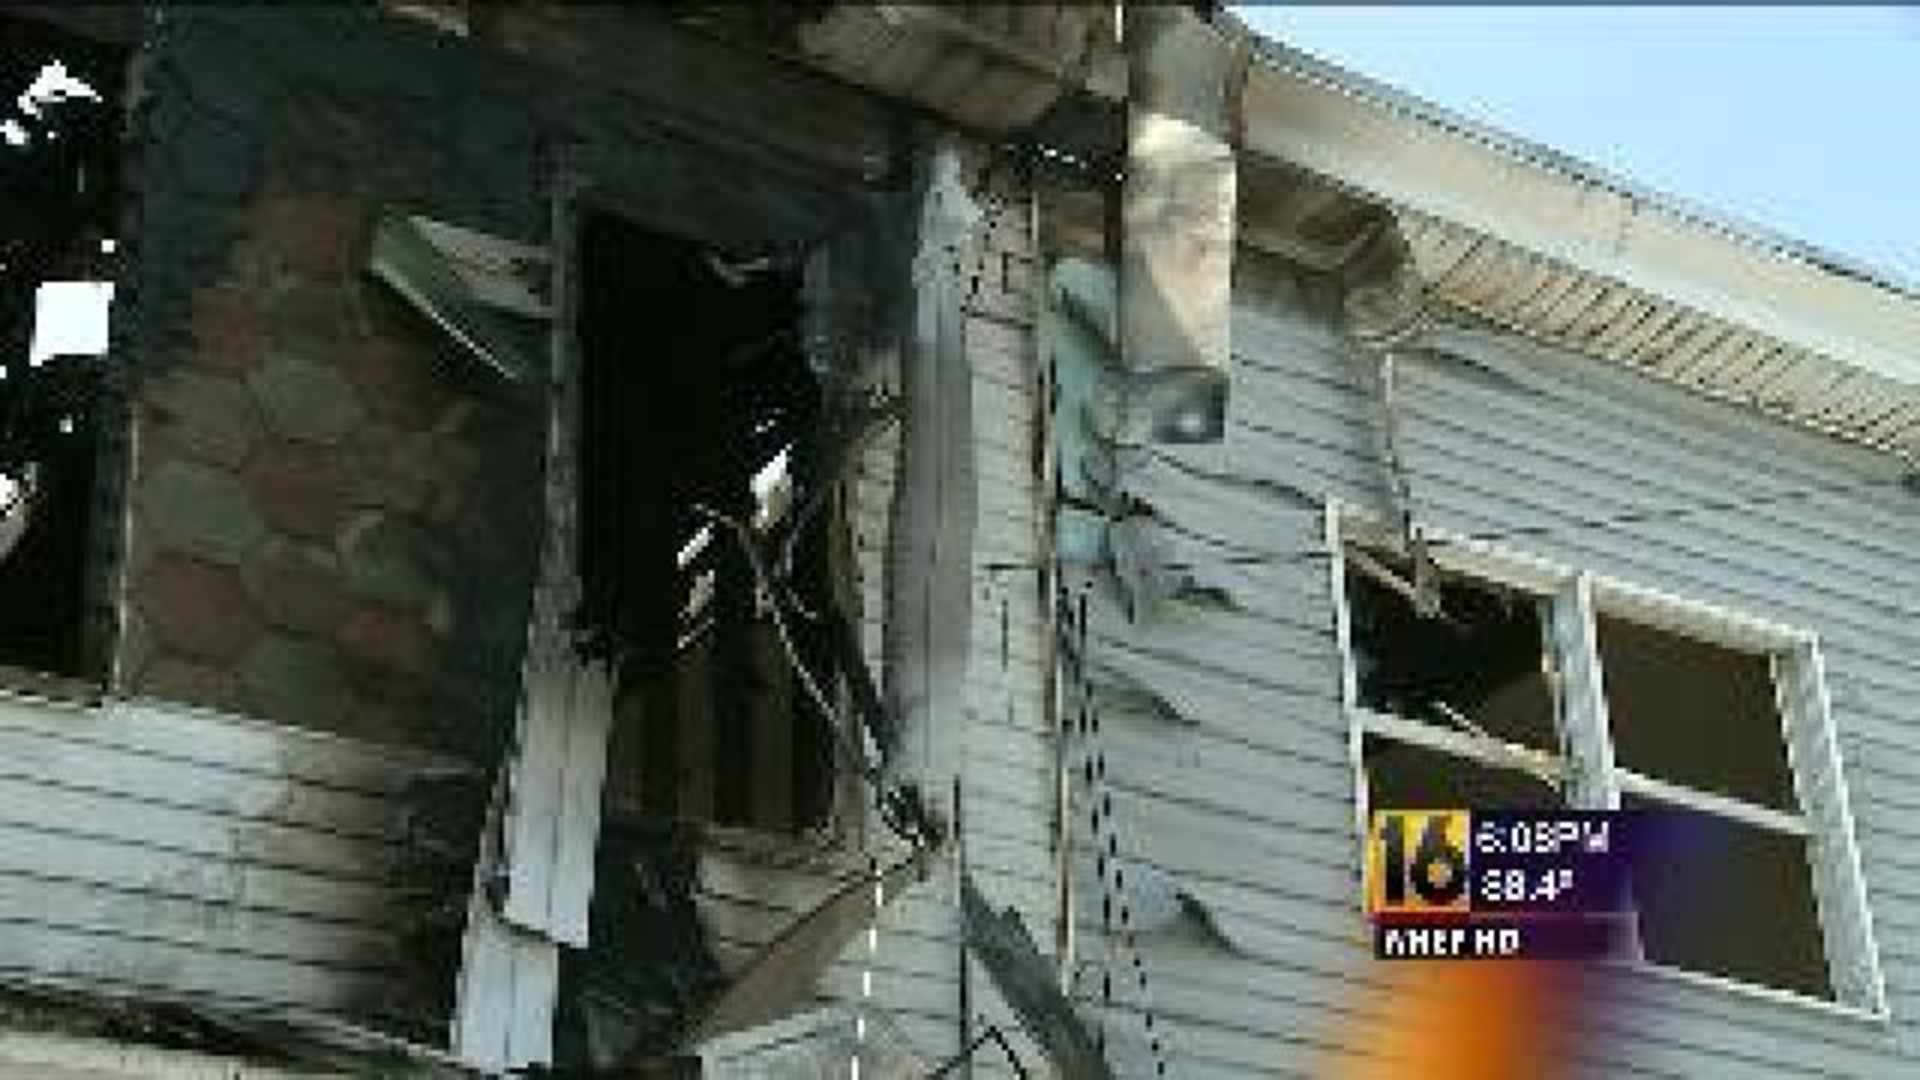 Fire Marshal: Overloaded Electrical Outlet Sparked Fire